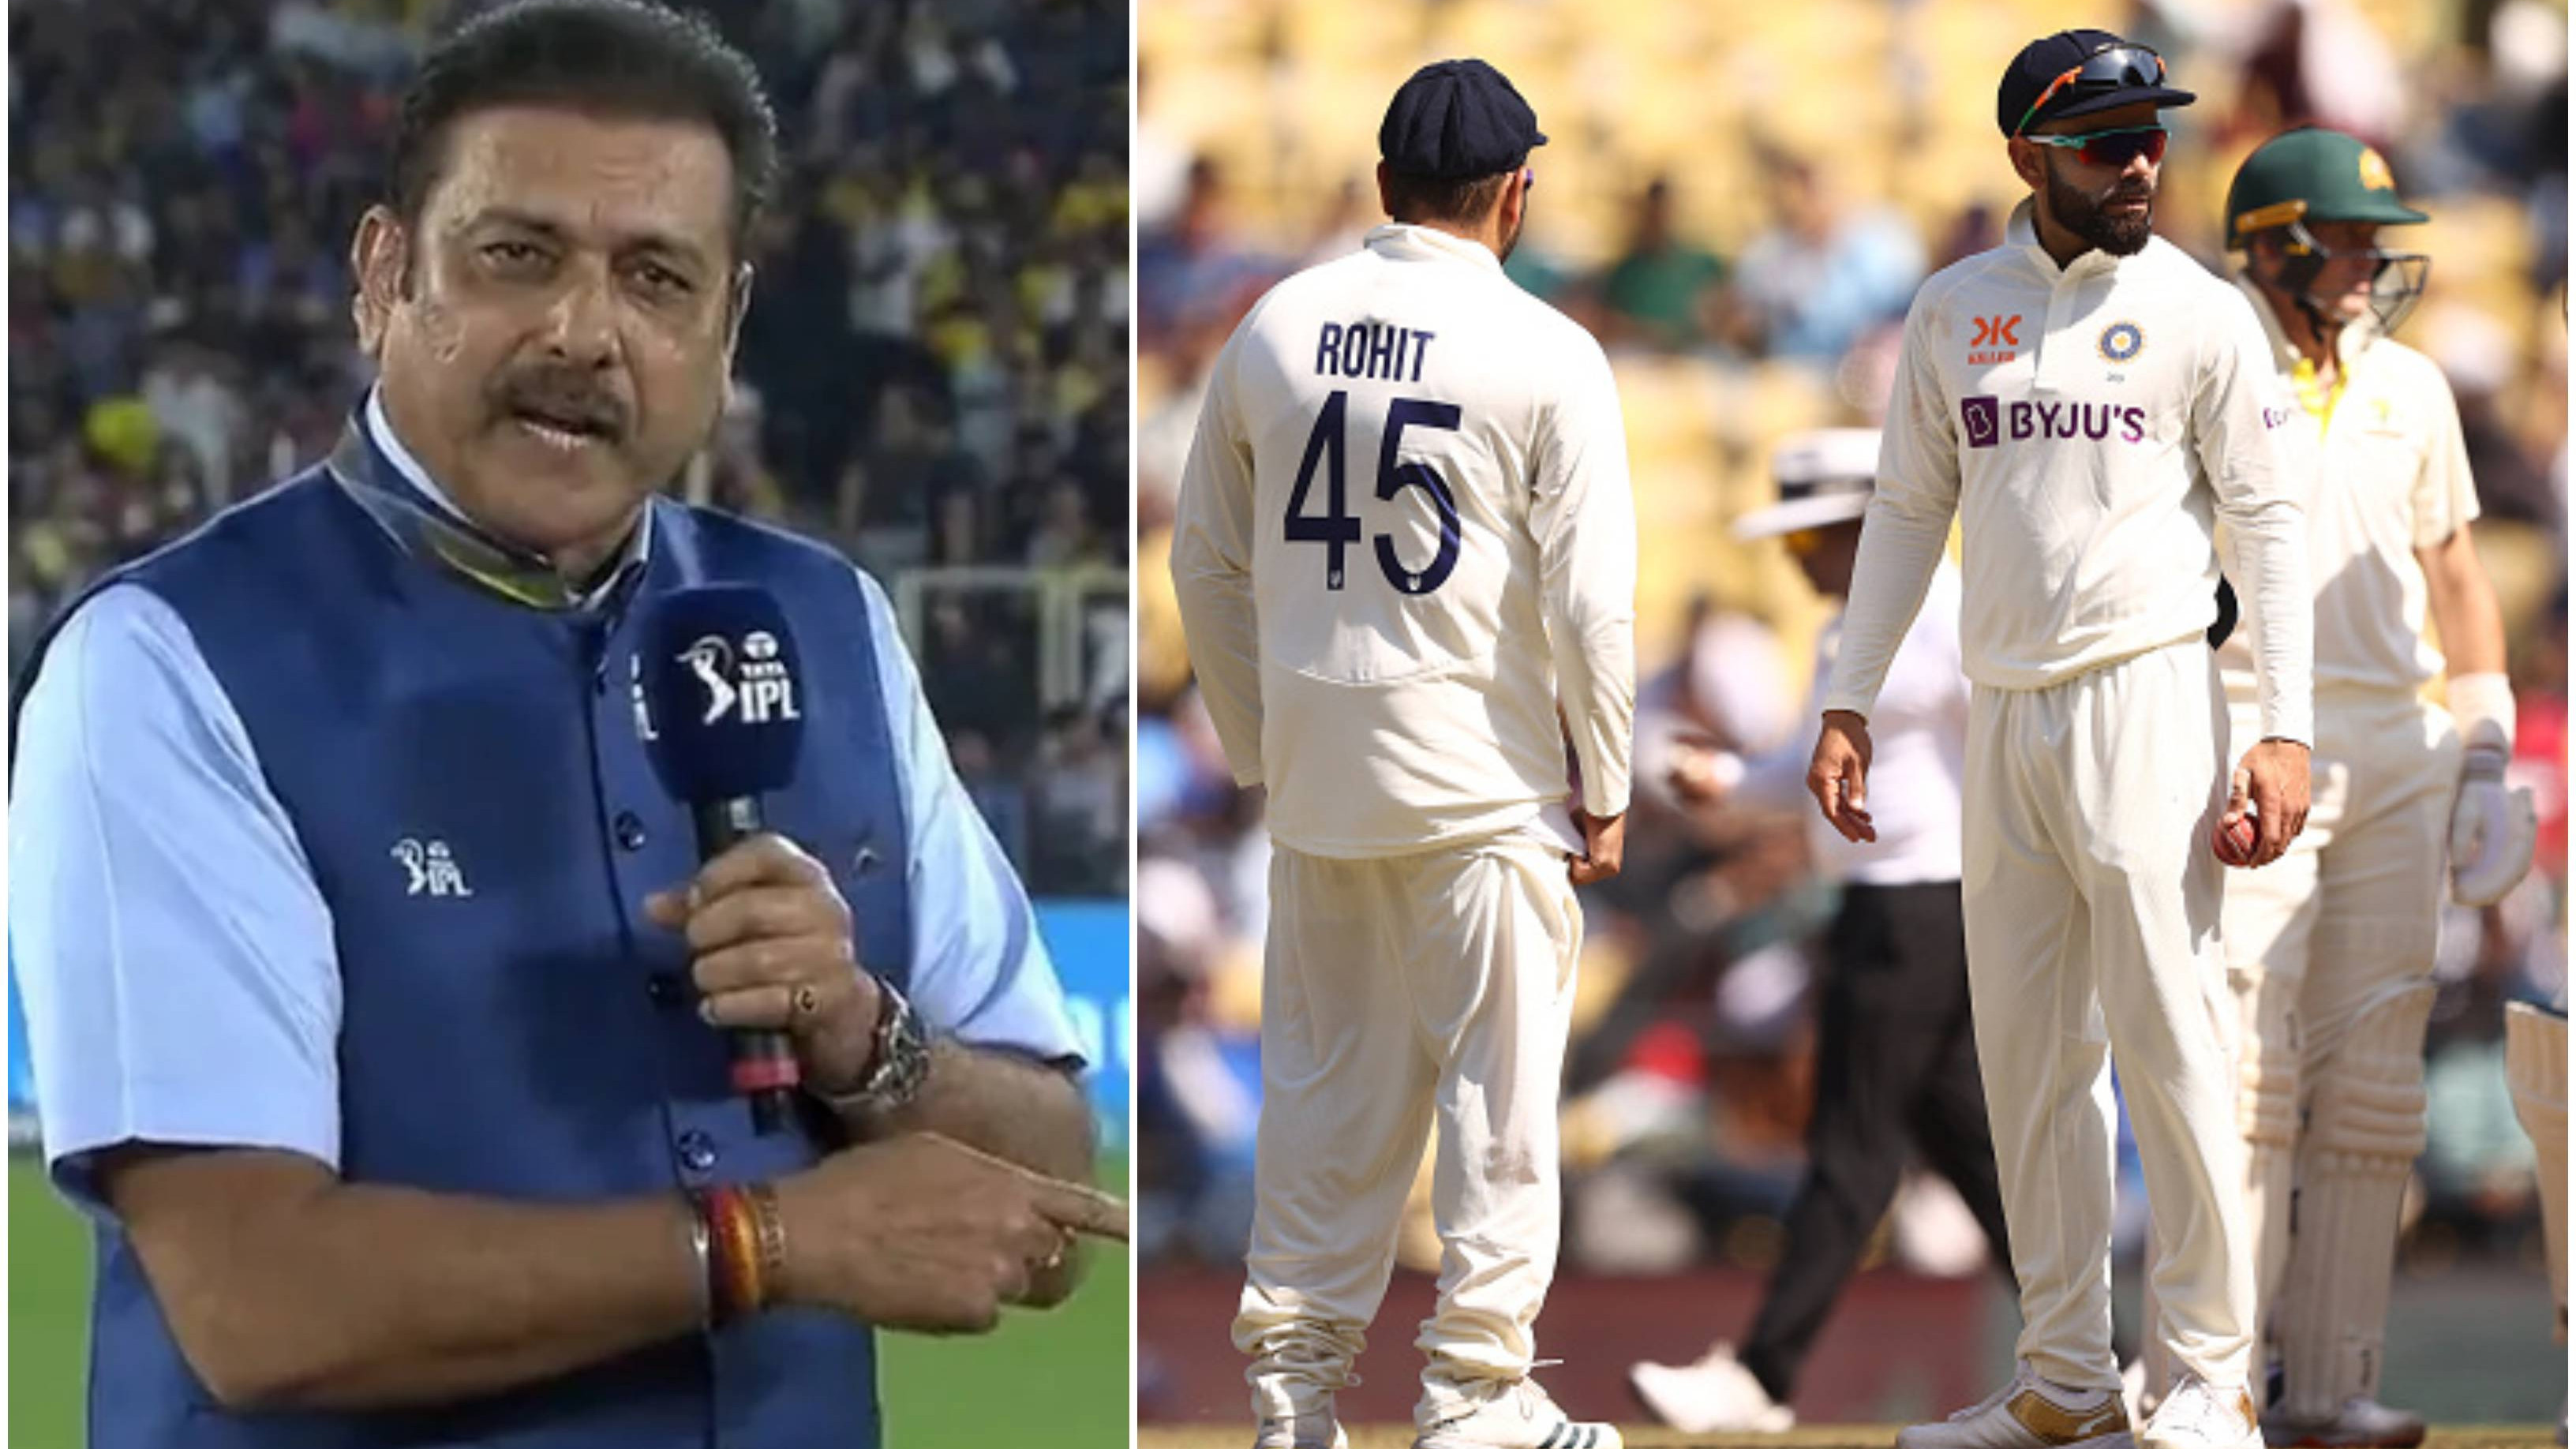 “Definitely I'll look in that direction,” Shastri bats for Kohli to lead India in big games like WTC final if Rohit is unavailable